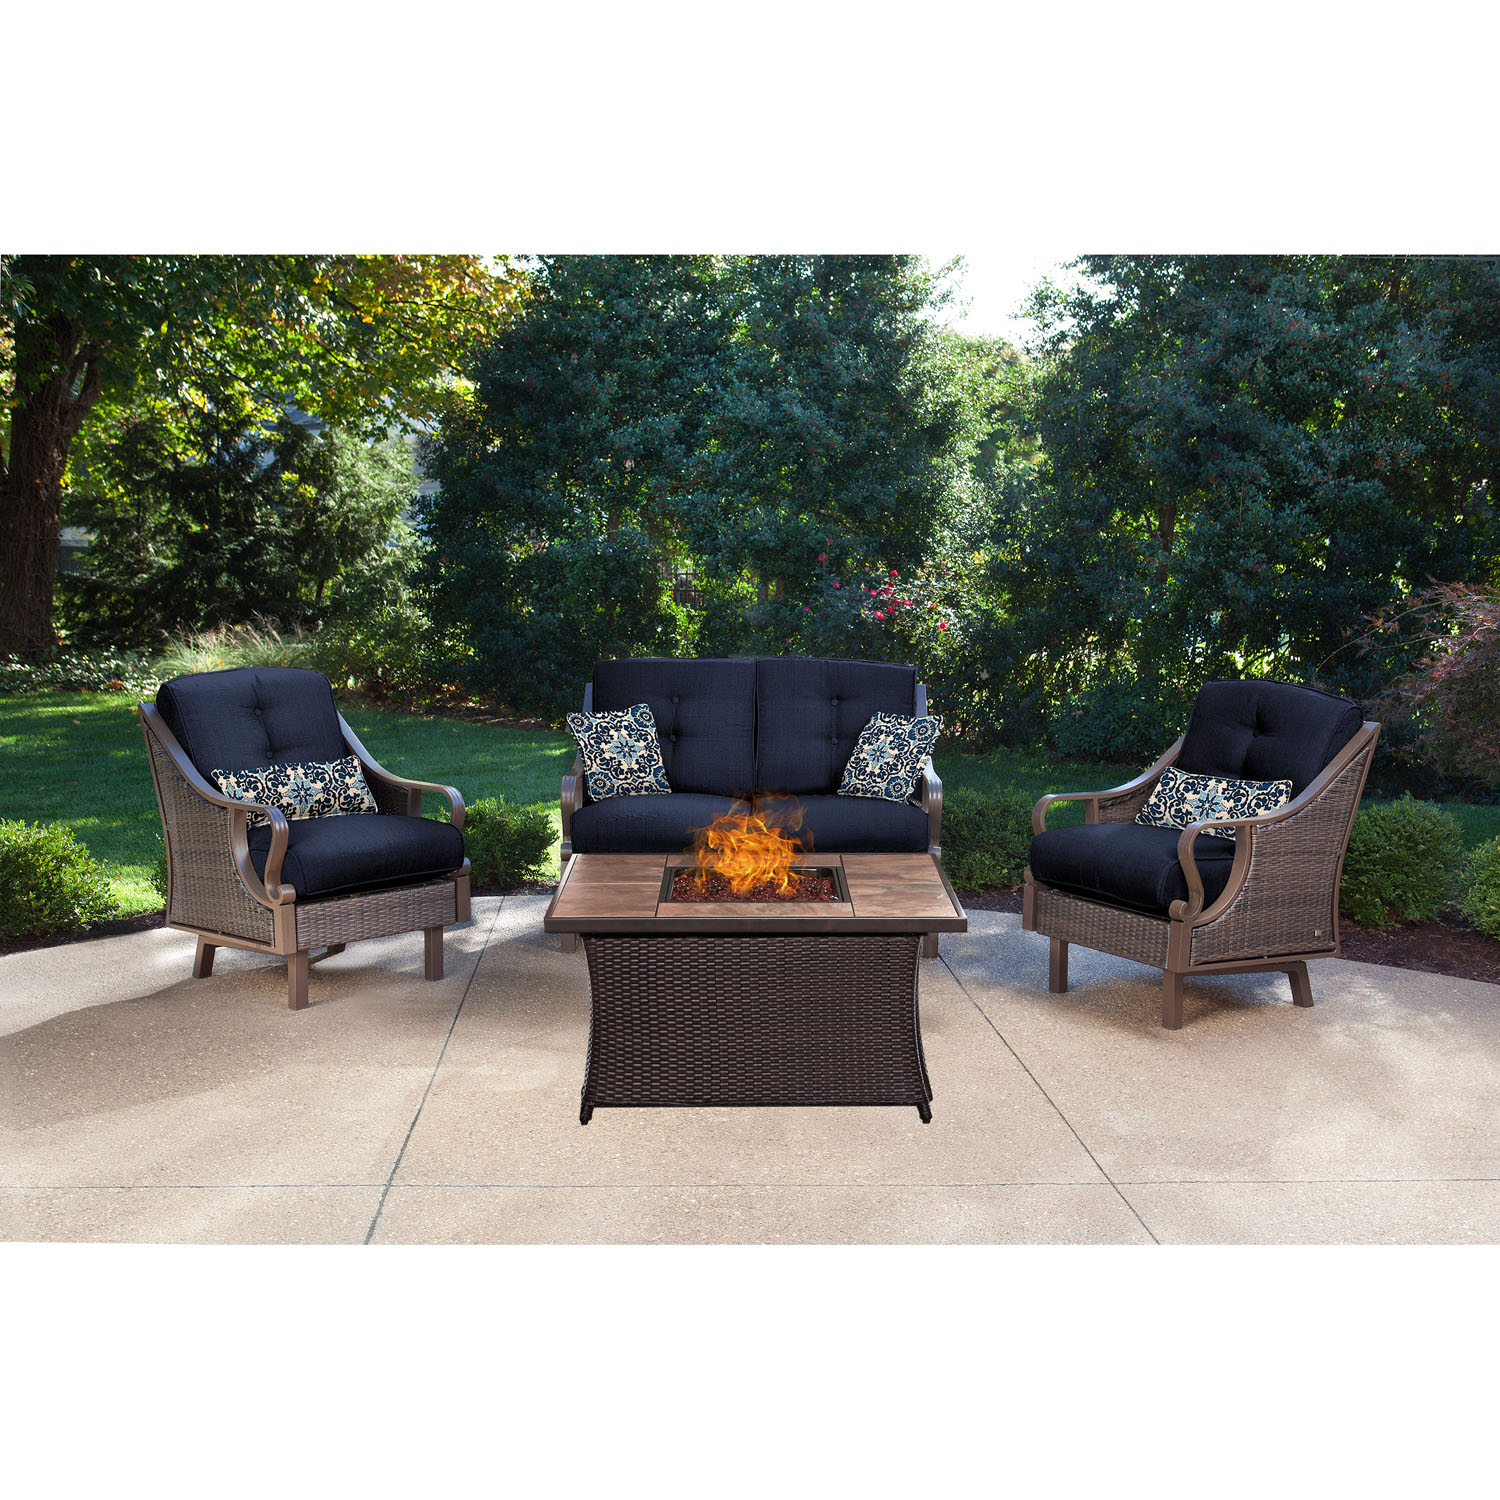 Hanover Ventura 4-Piece Fire Pit Lounge Set with Faux-Stone Tile Top - image 1 of 11